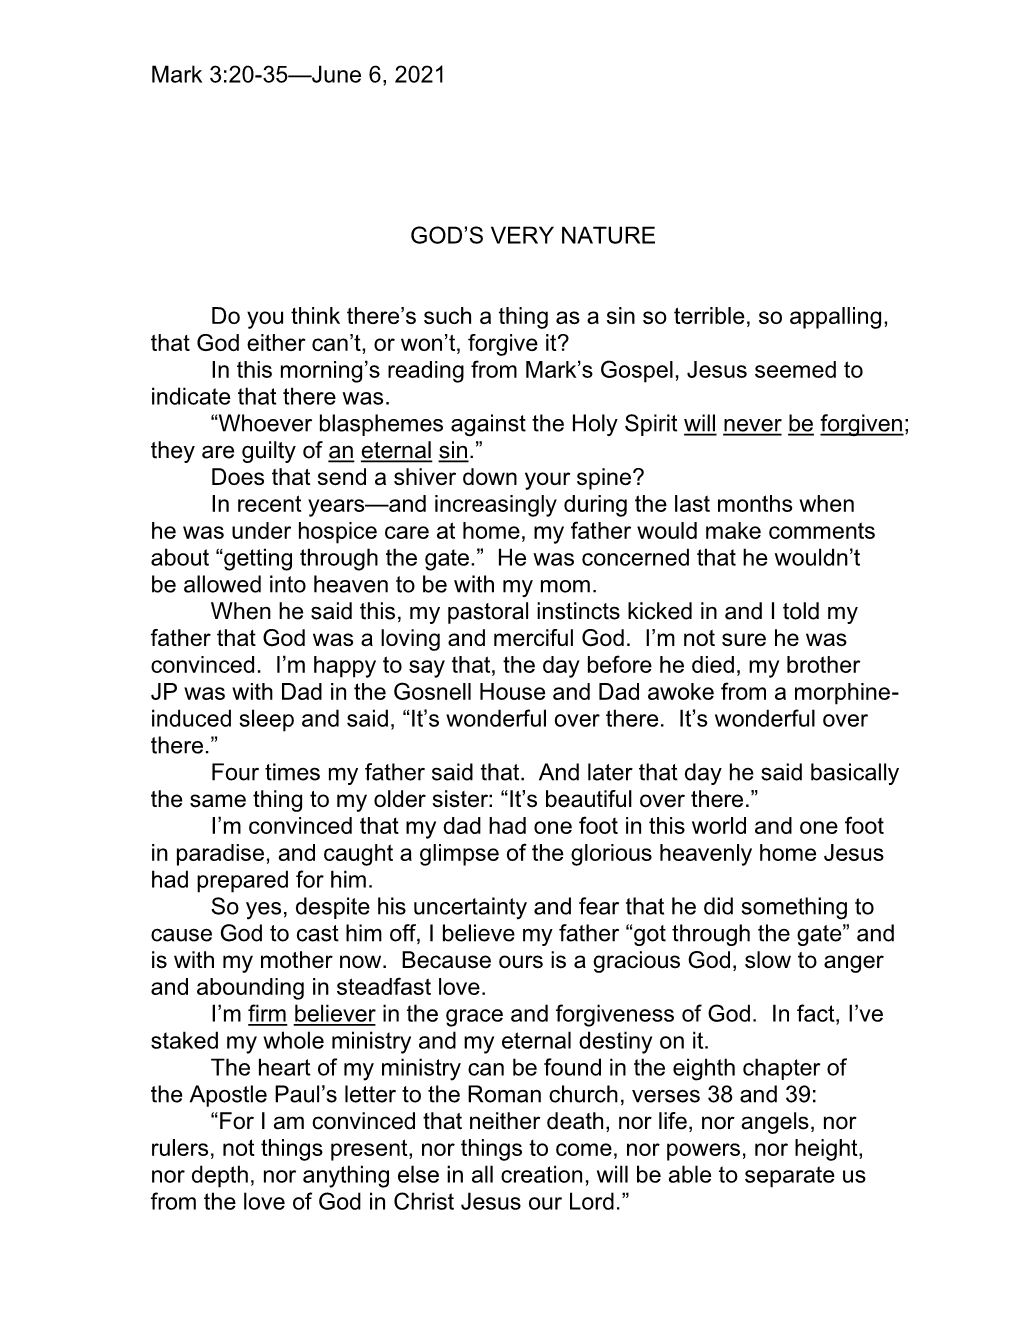 Mark 3:20-35—June 6, 2021 GOD's VERY NATURE Do You Think